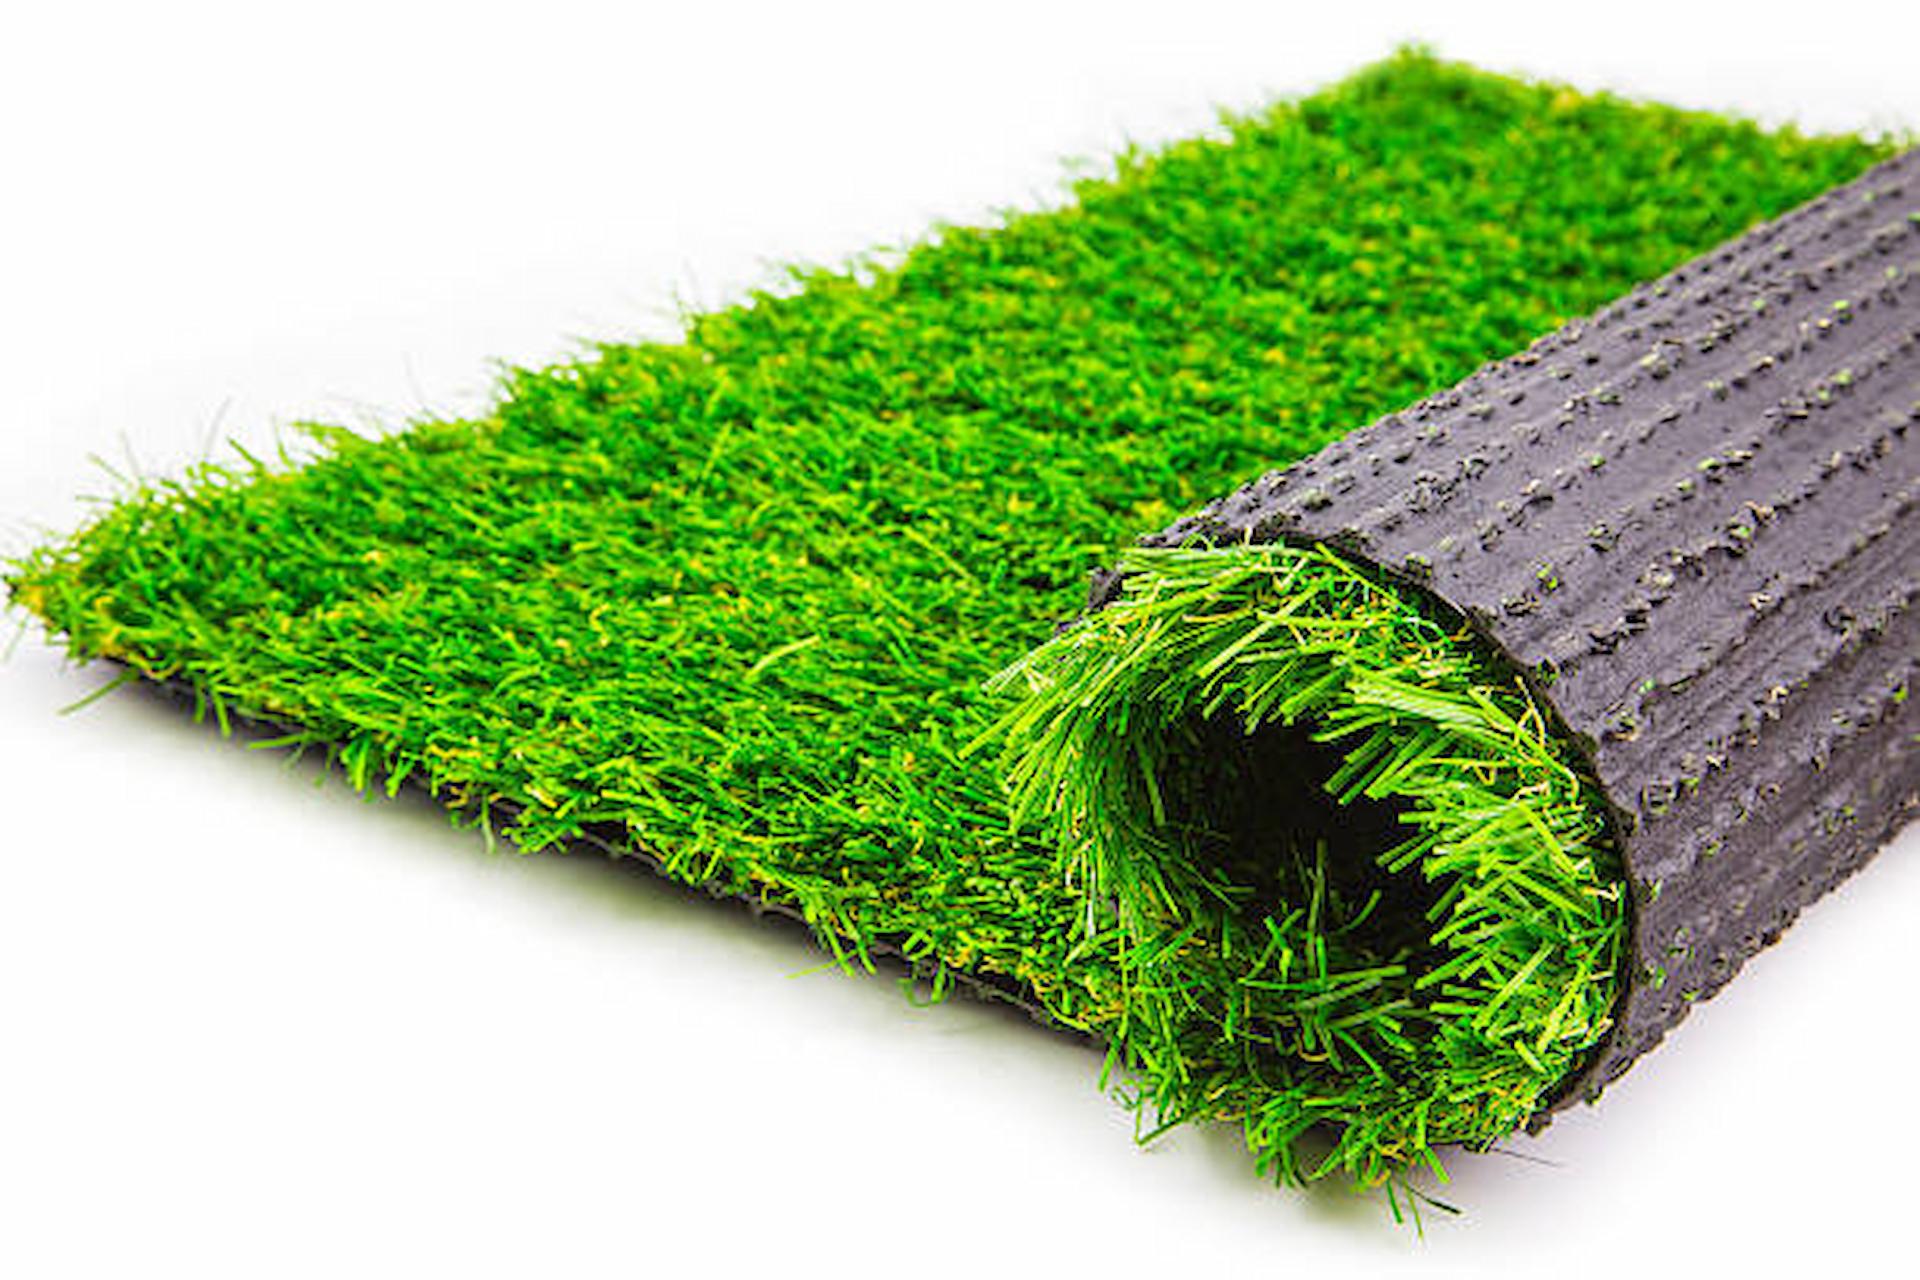 How Does Artificial Grass Help Your Space Look Better?